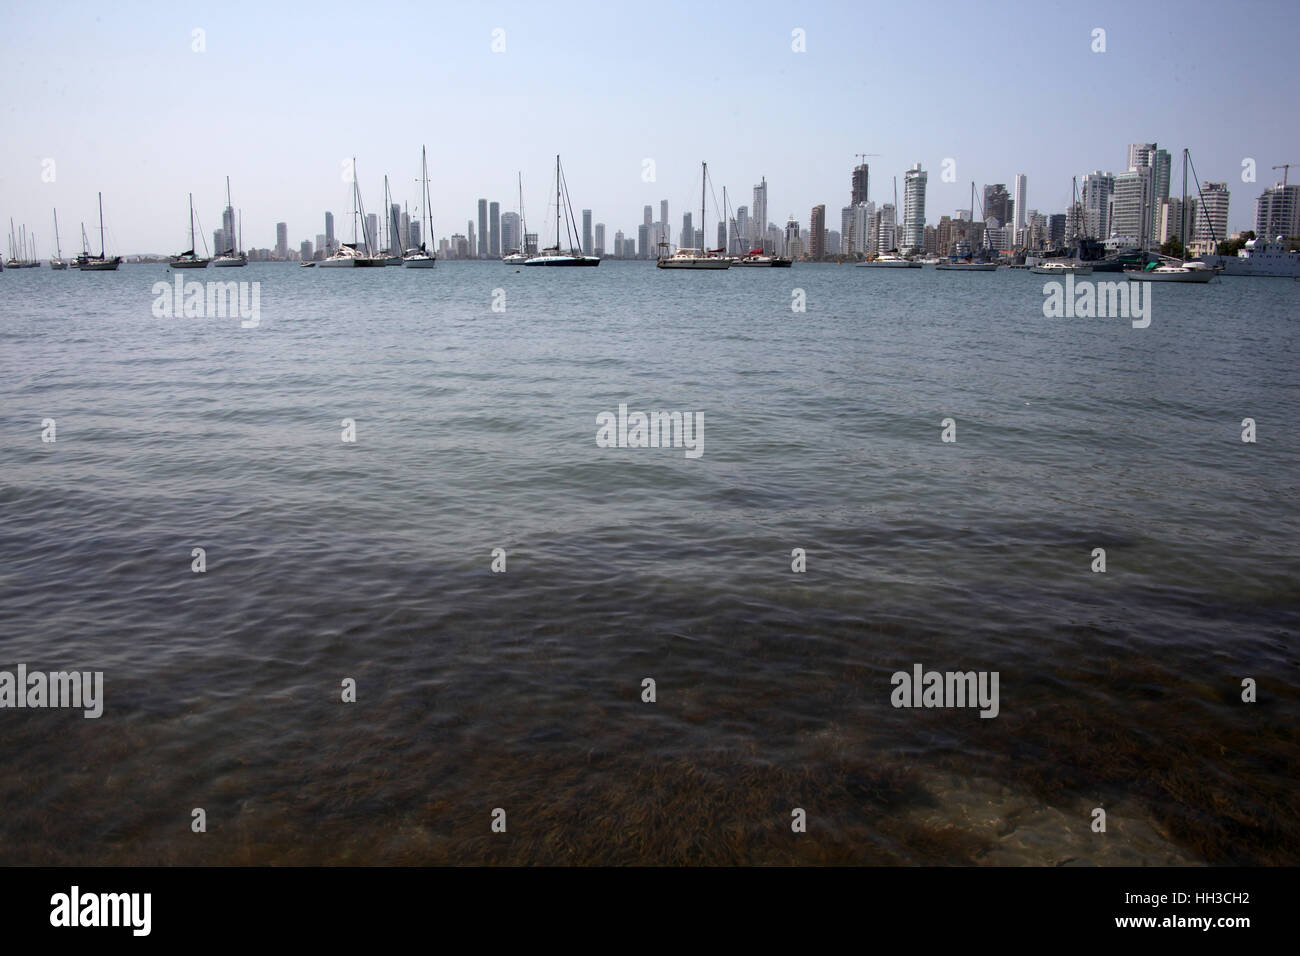 Skyline of the city of Cartagena, Colombia over the Carribean ocean port entrance, South America. Stock Photo